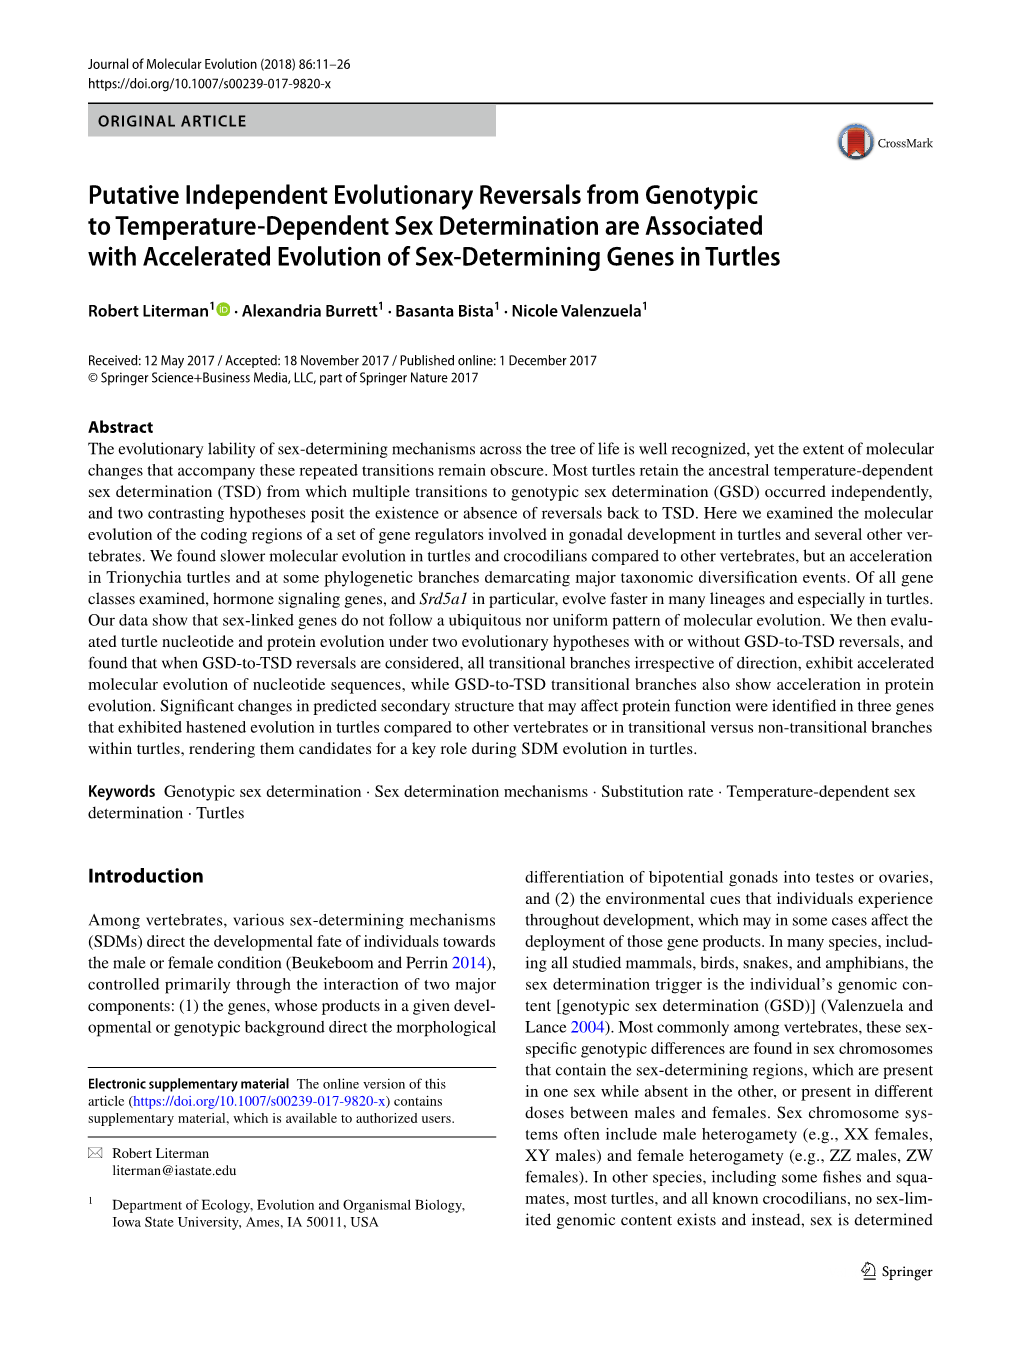 Putative Independent Evolutionary Reversals from Genotypic To